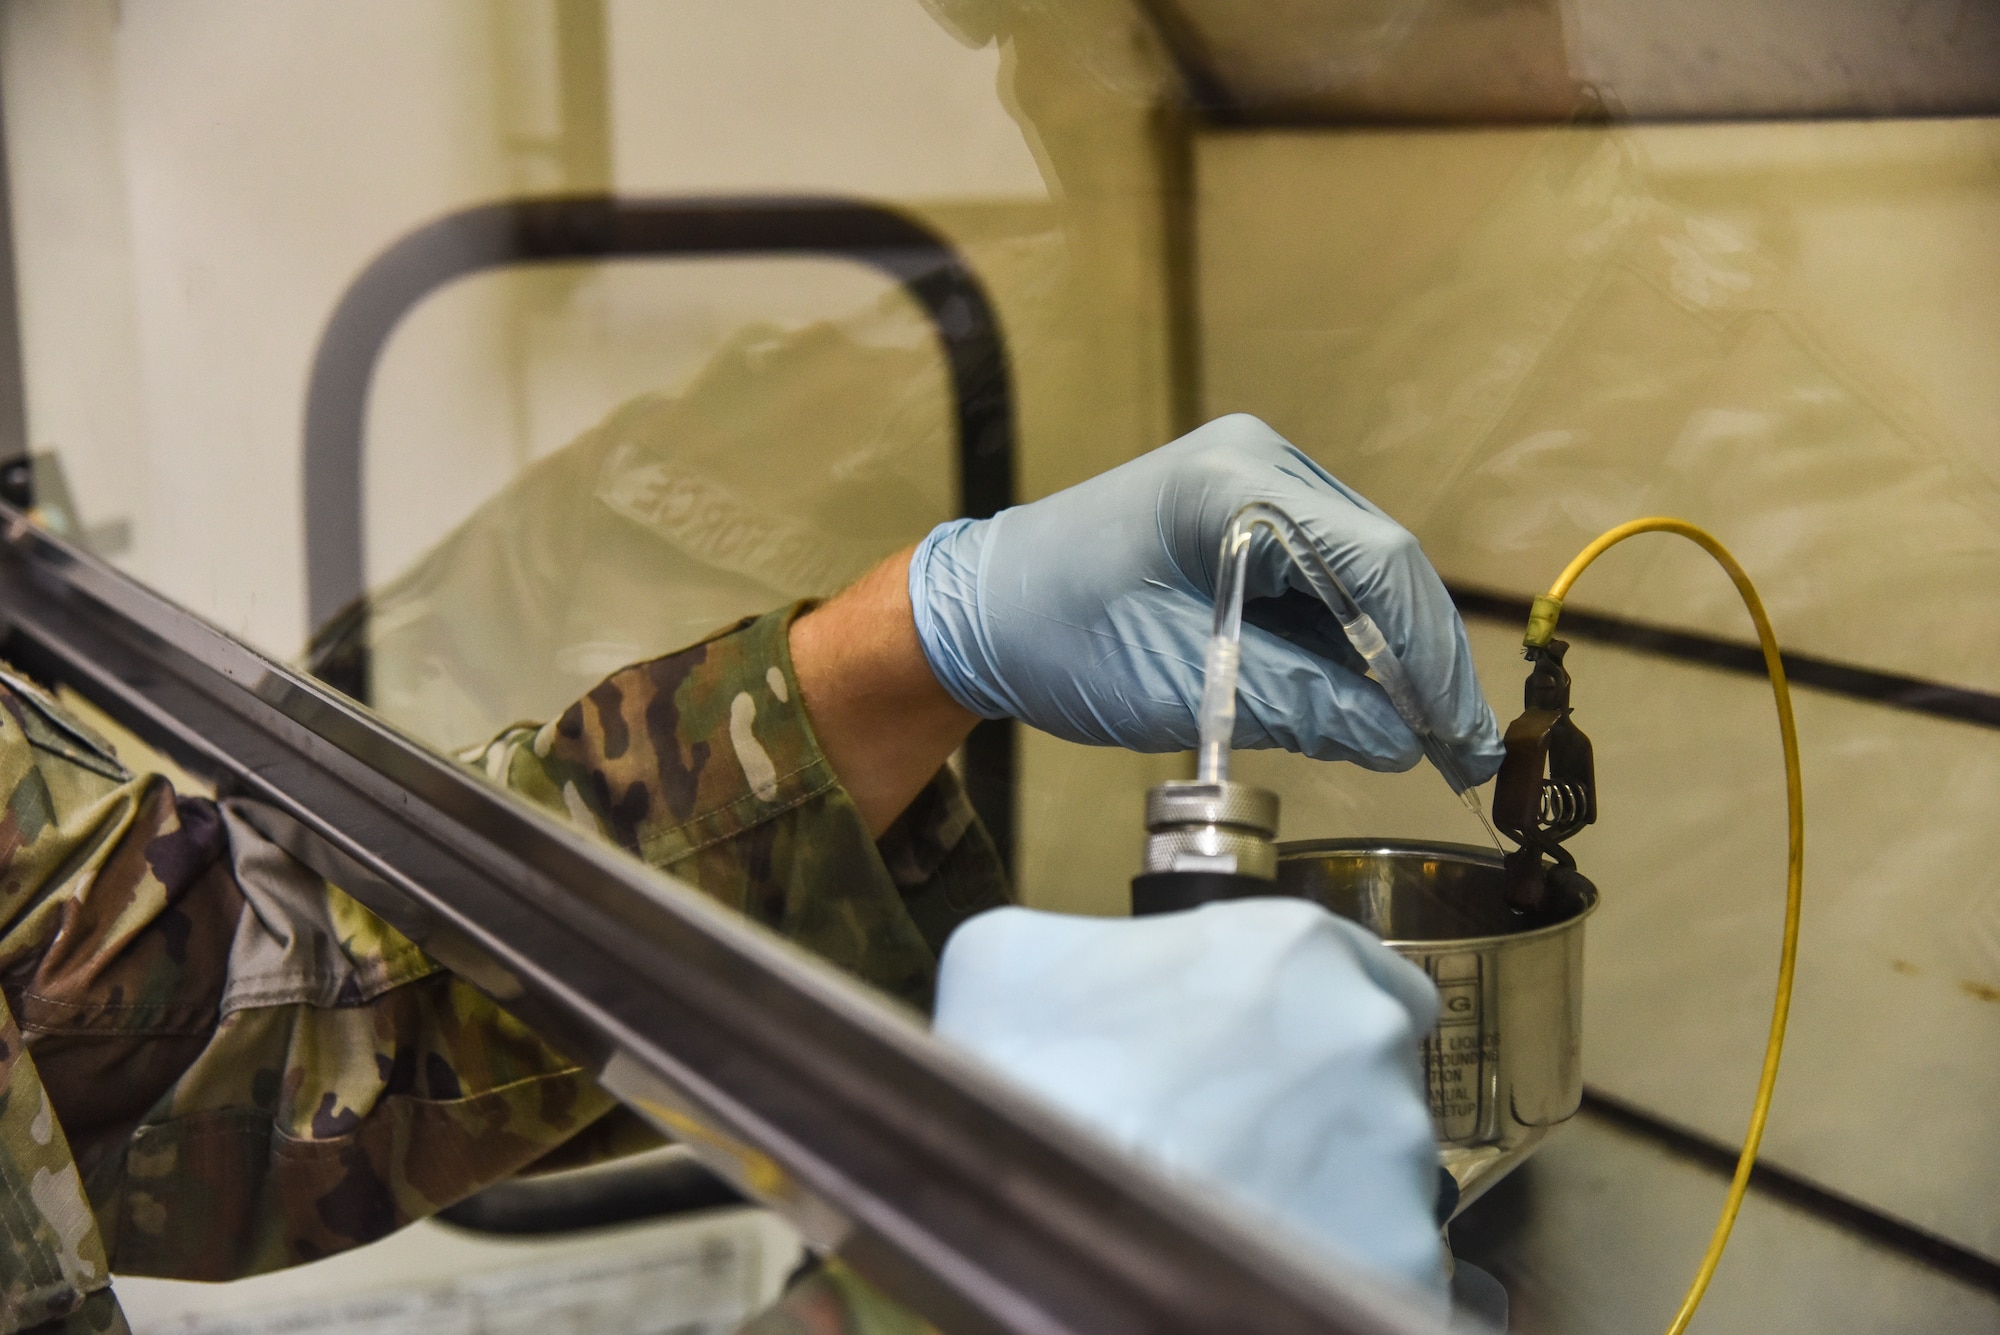 U.S. Air Force Staff Sgt. Ronald Wilkey, 380th Expeditionary Logistics Readiness Squadron fuels laboratory supervisor, performs a bottle method test to determine the particle content of the fuel at Al Dhafra Air Base, United Arab Emirates, Jan. 21, 2019. The lab personnel sample all fuel grades from the fuel bladders, tanks, trucks and pipeline on a daily basis. (U.S. Air Force photo by Senior Airman Mya M. Crosby)